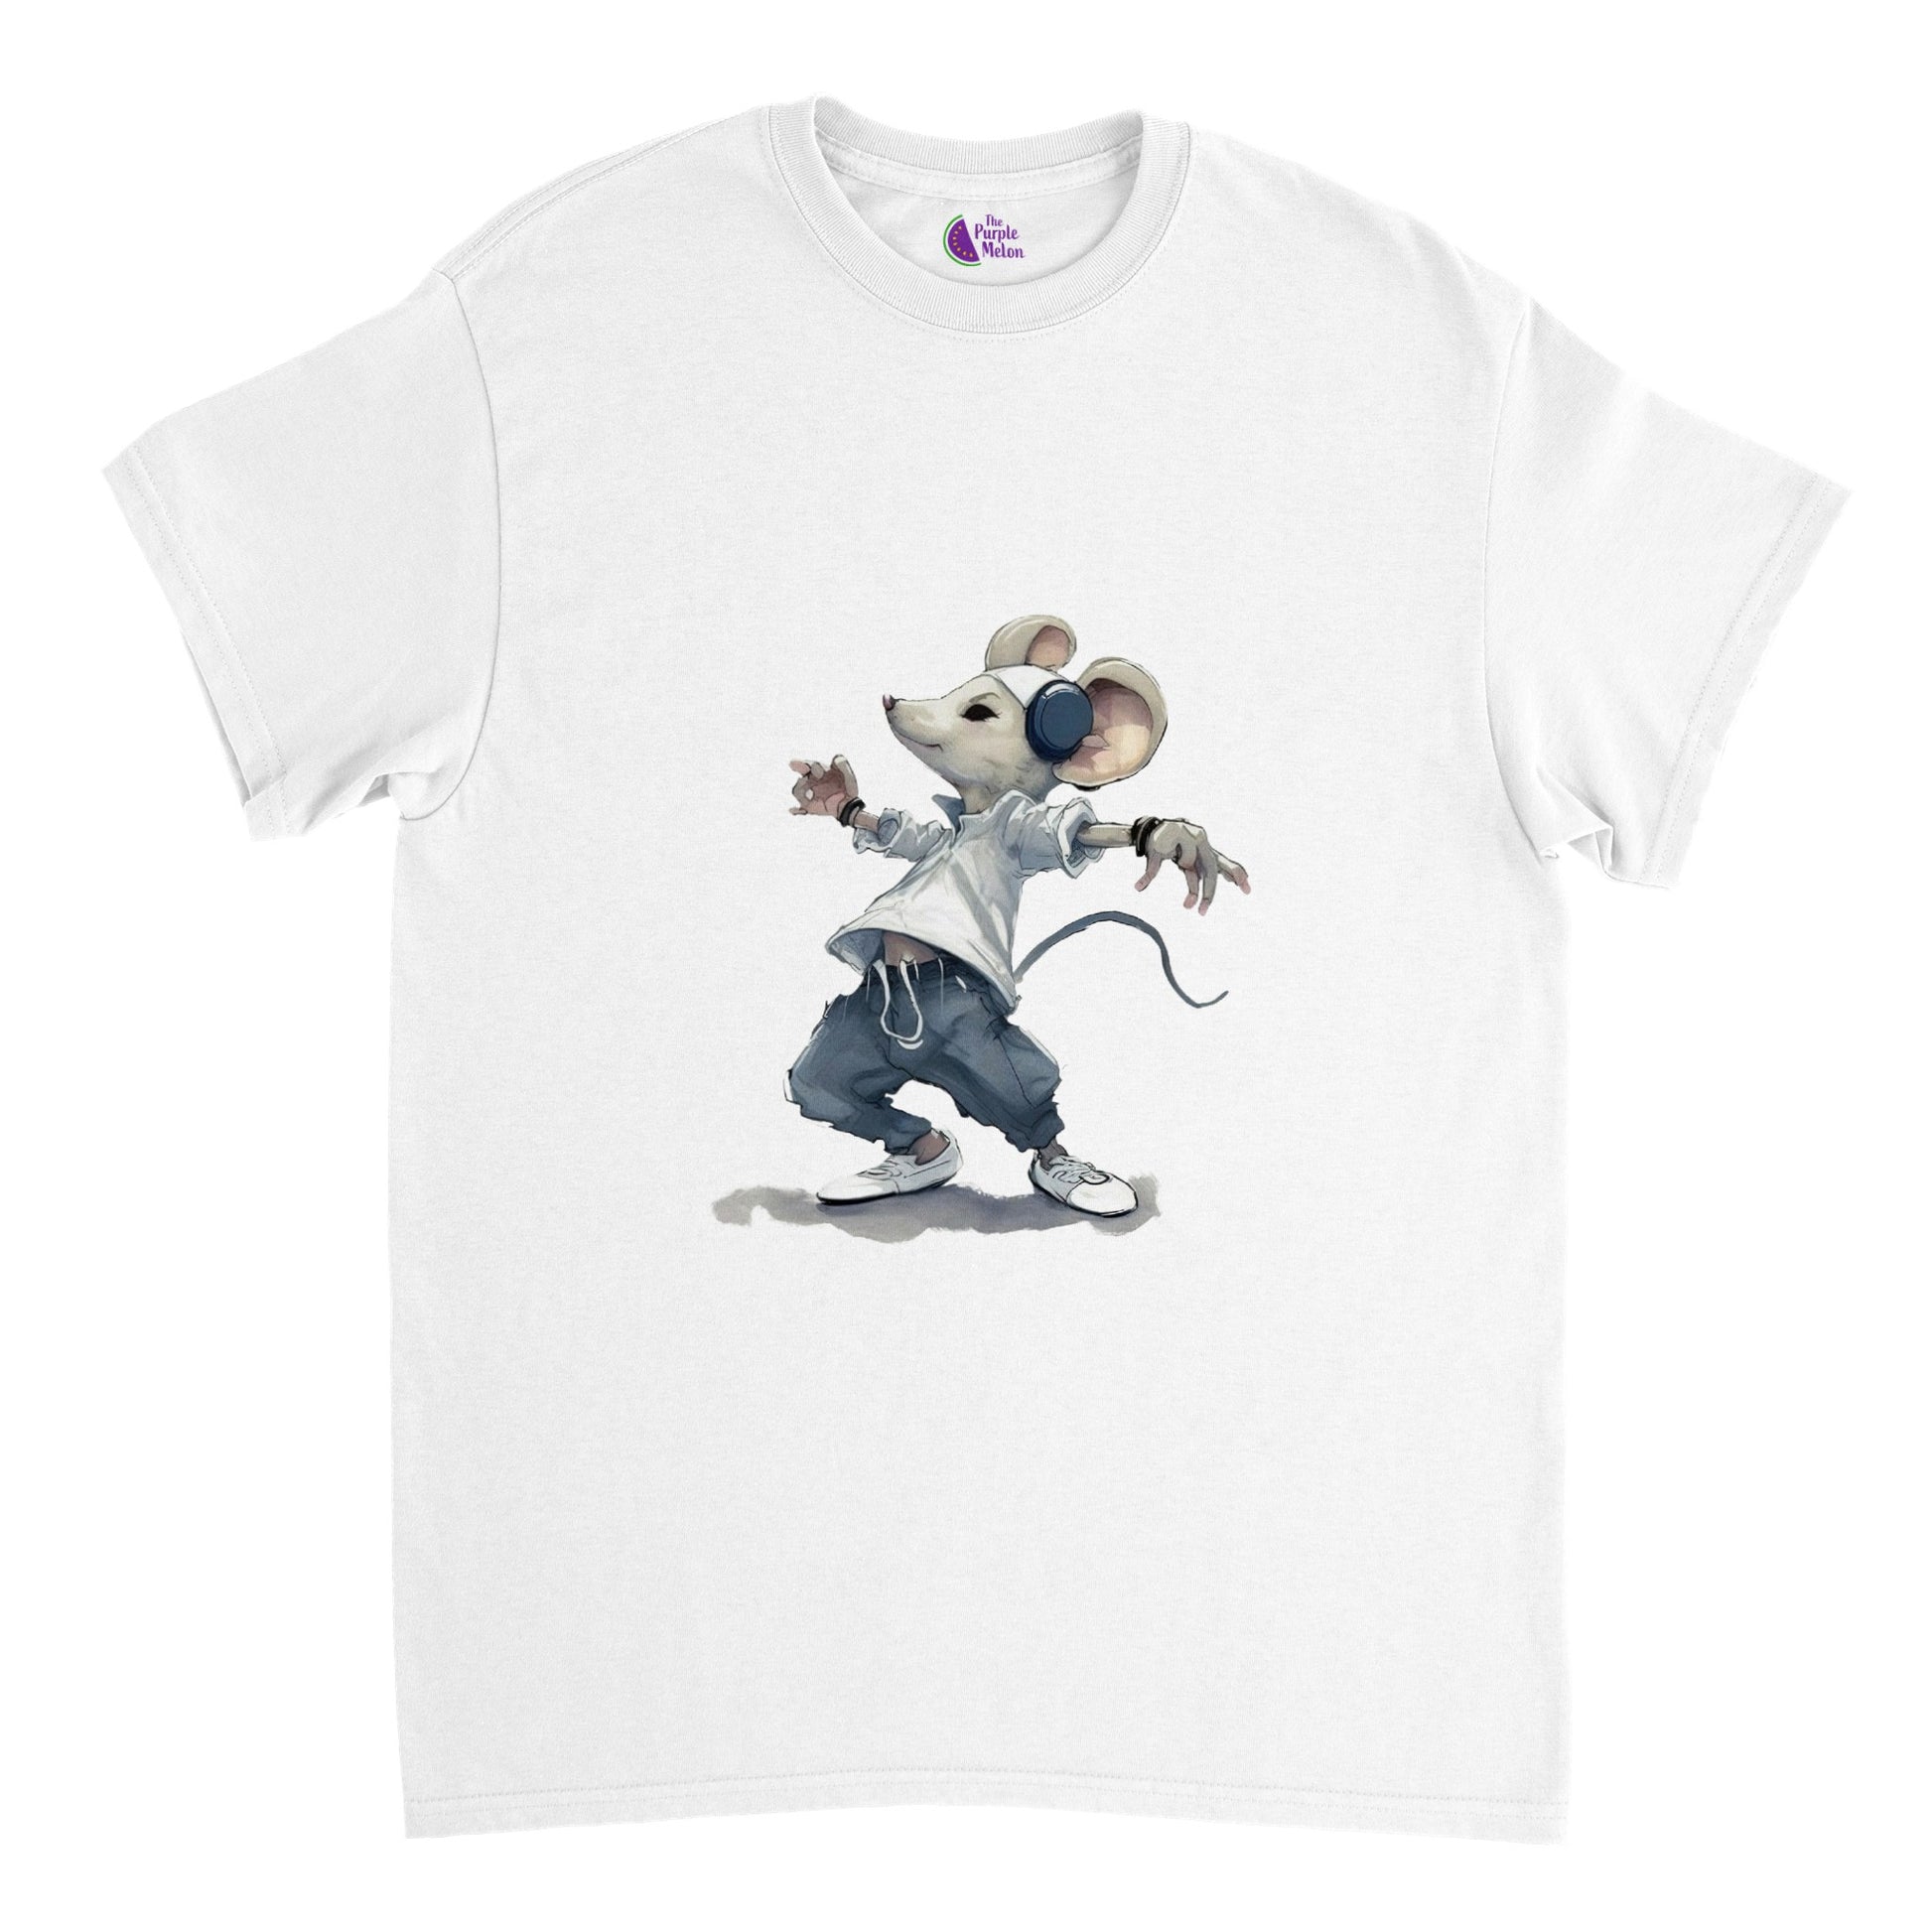 White t-shirt with a hip hop mouse print